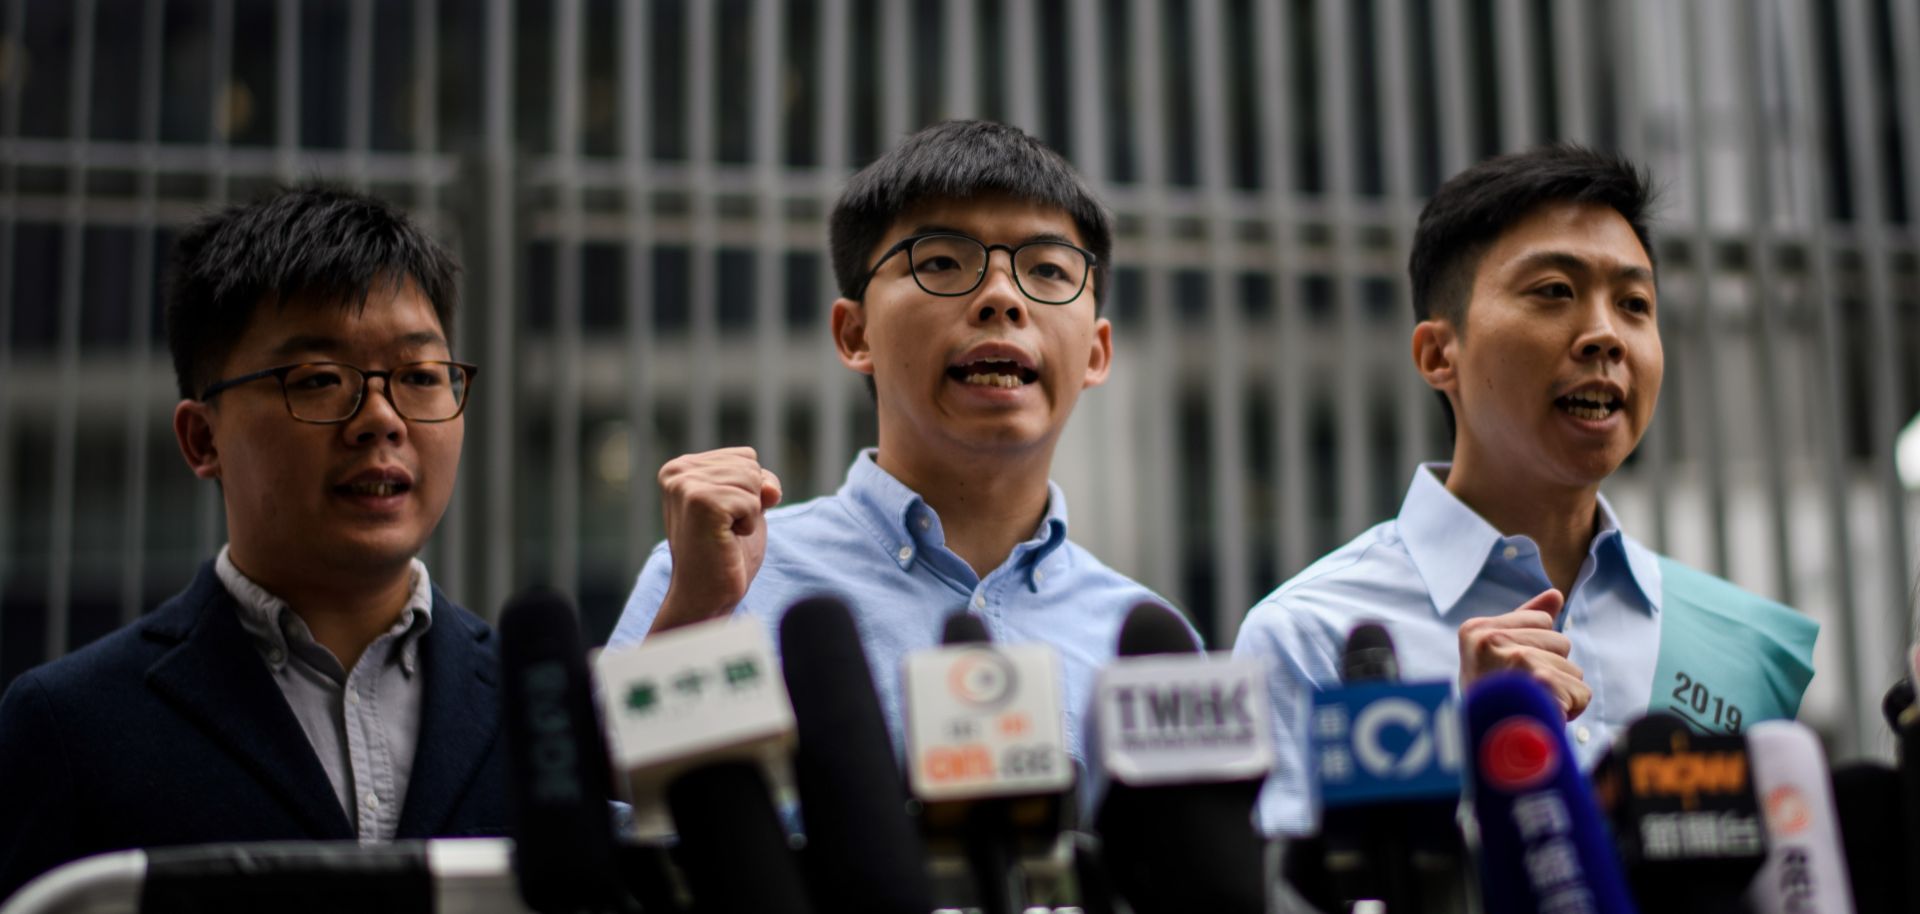 This photo shows Hong Kong pro-democracy activists Joshua Wong and Kelvin Lam protesting in front of the Legislative Council building after Wong was disqualified from running in district council elections.